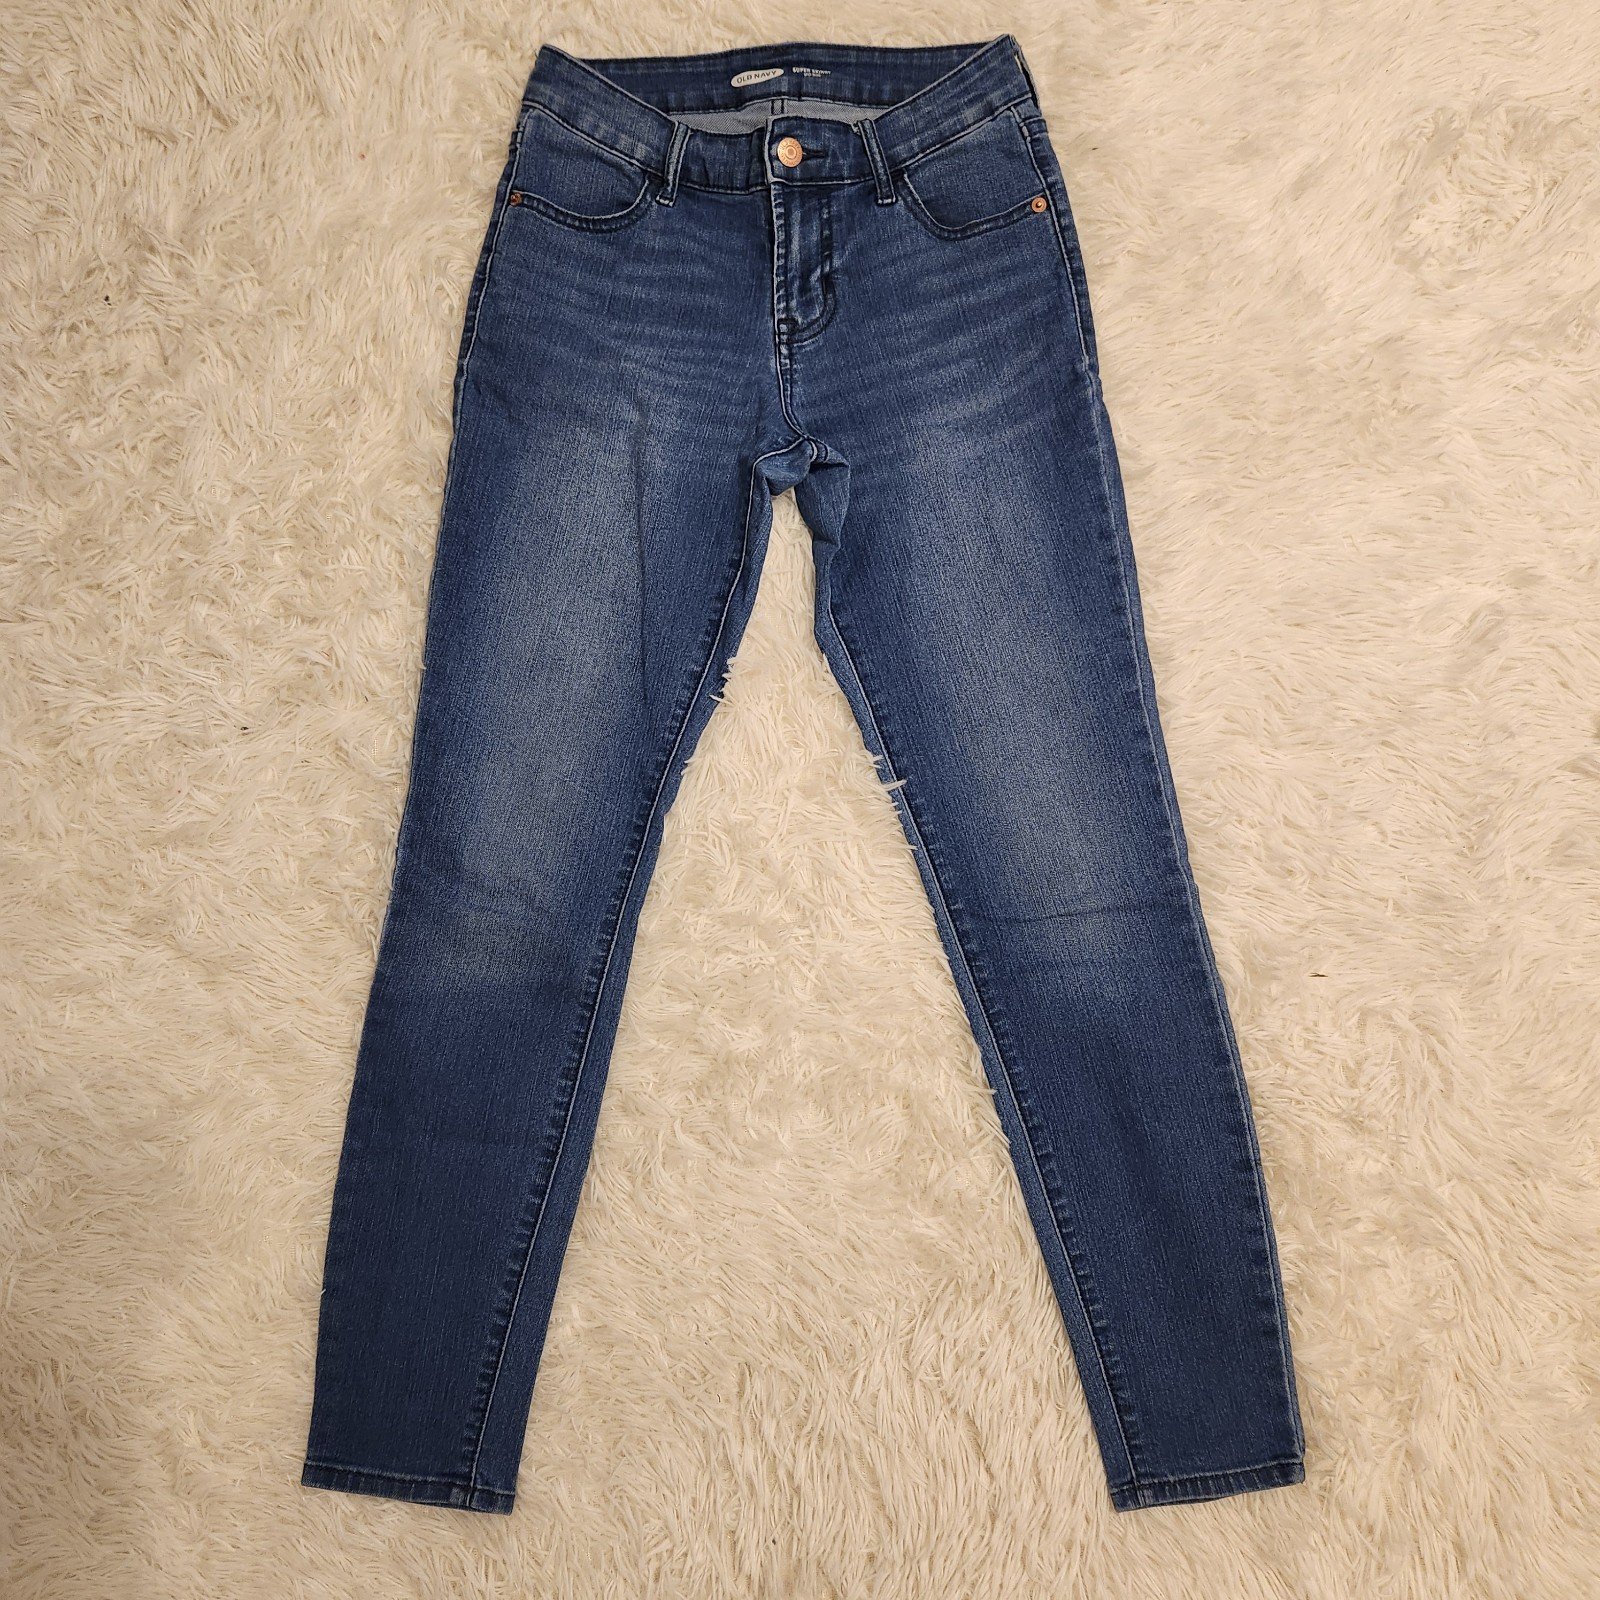 Affordable Old Navy Mid Rise Skinny Jeans 0S iPYczkmkK 